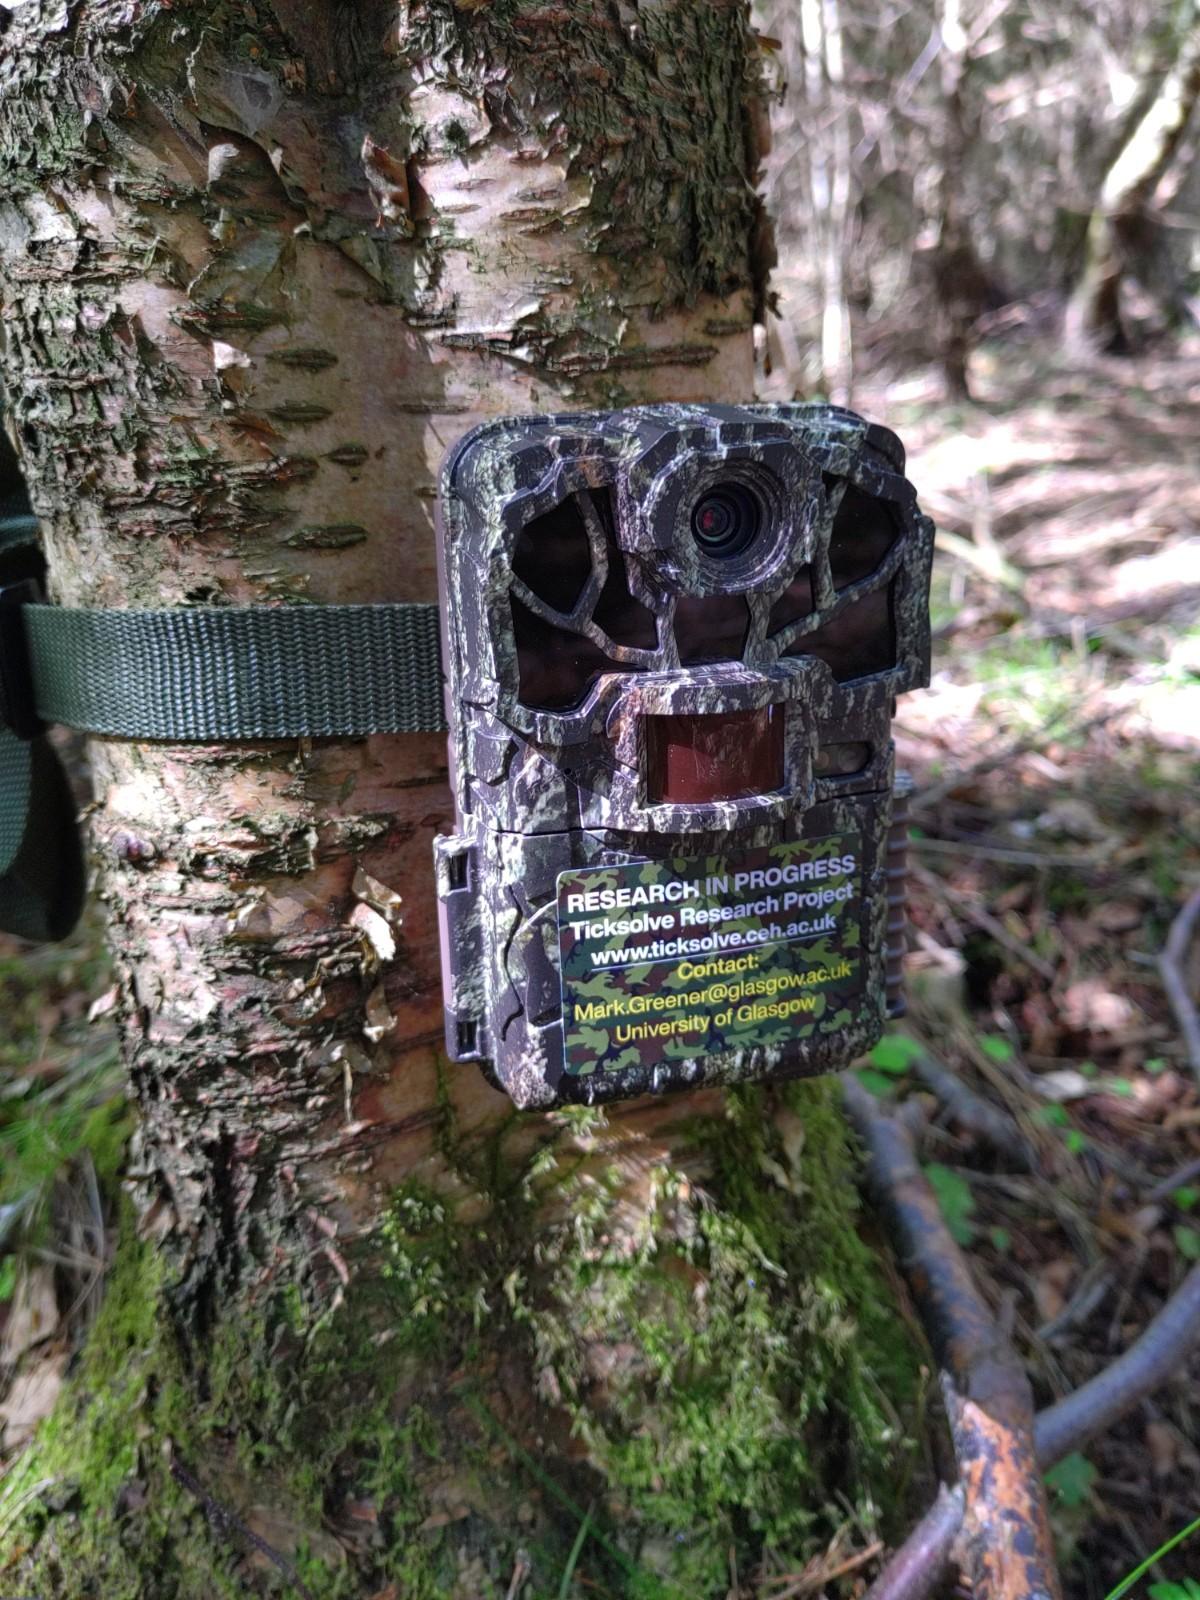 Camera trap for collecting data on the diversity and abundance of tick hosts 